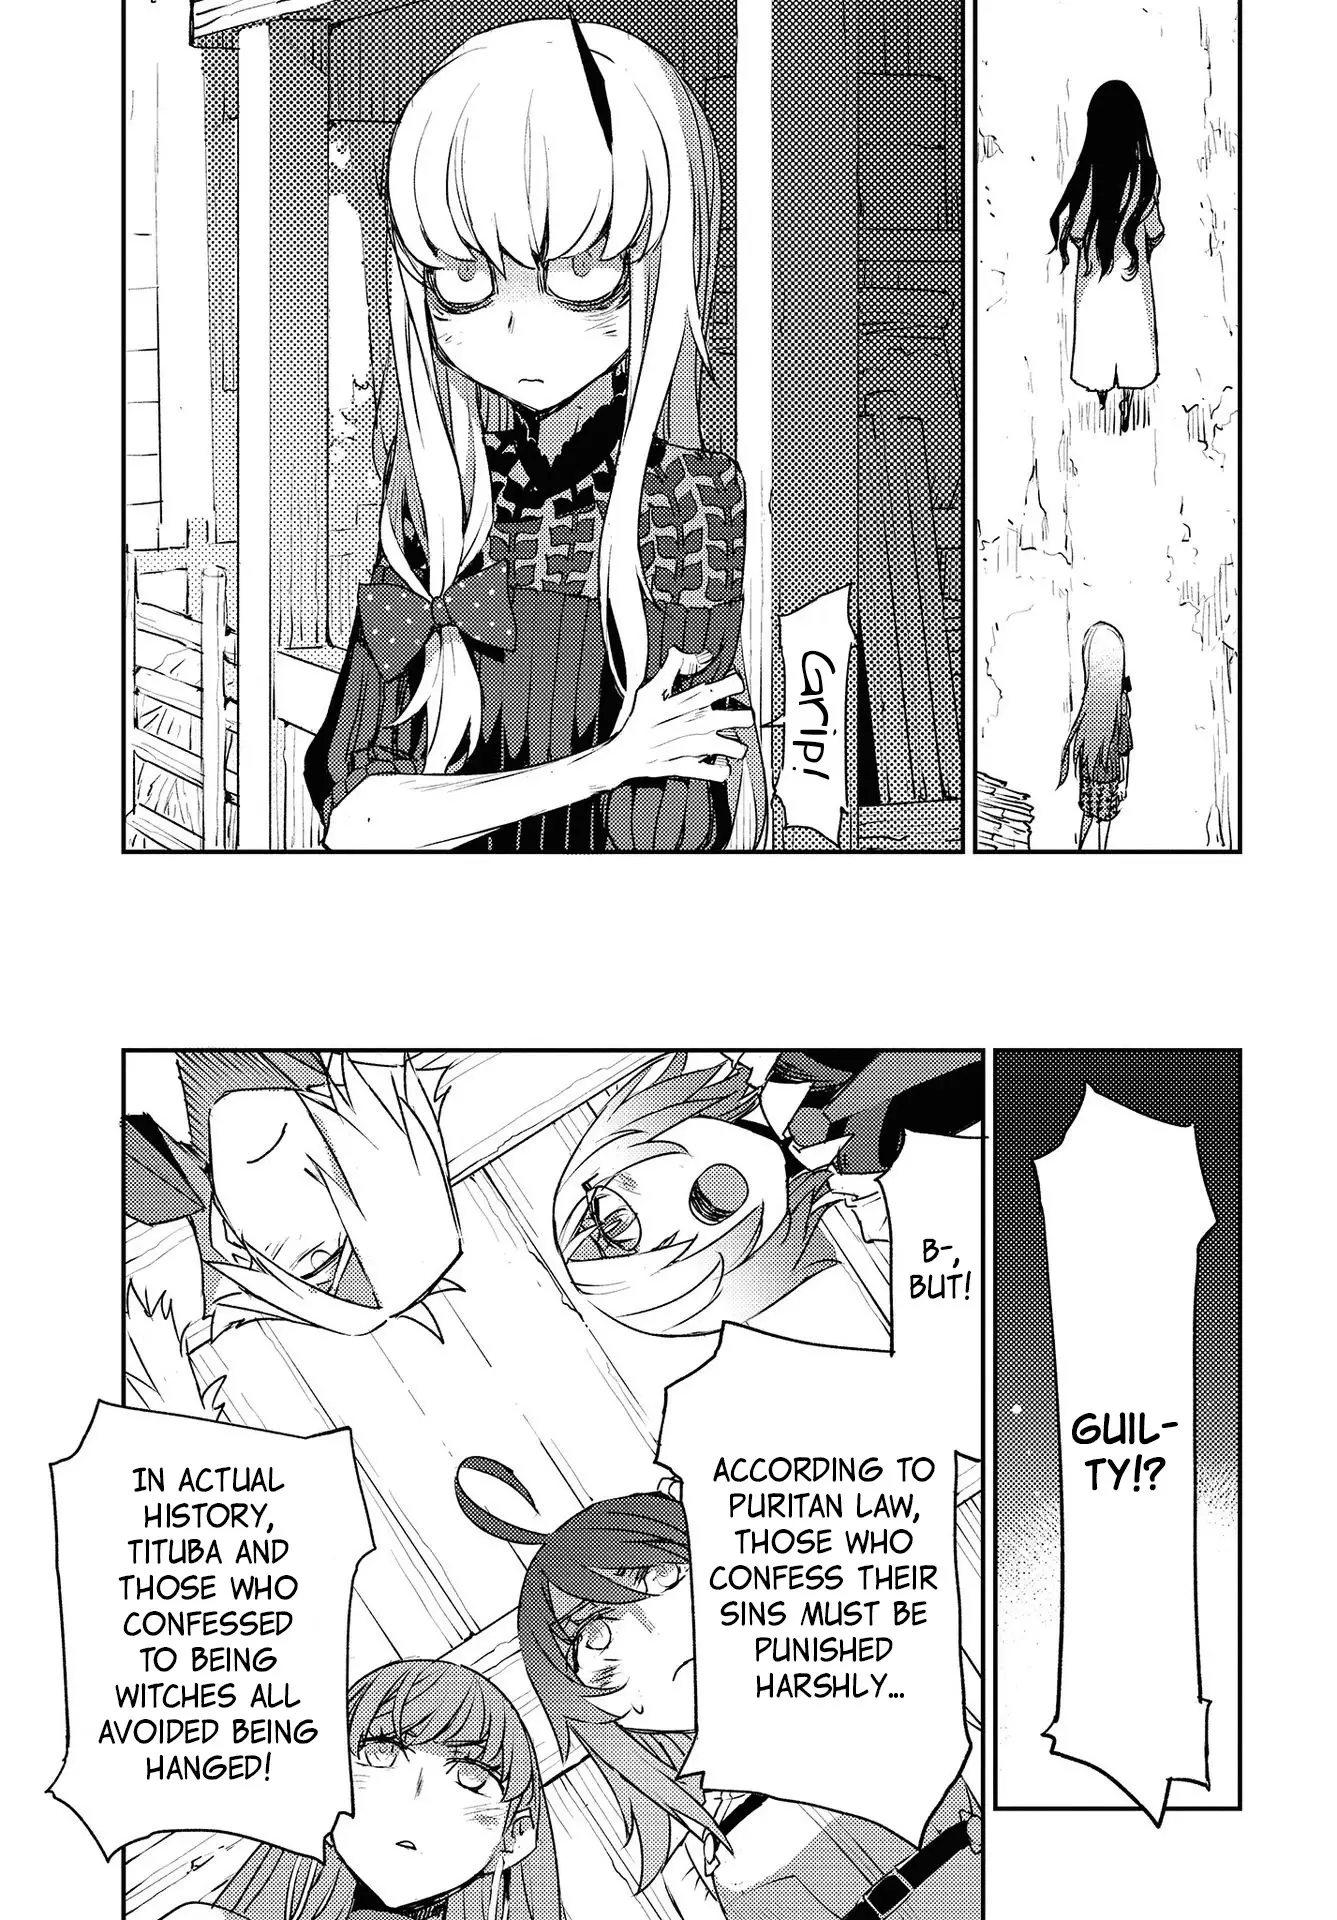 Fate/grand Order: Epic Of Remnant - Subspecies Singularity Iv: Taboo Advent Salem: Salem Of Heresy - 11 page 17